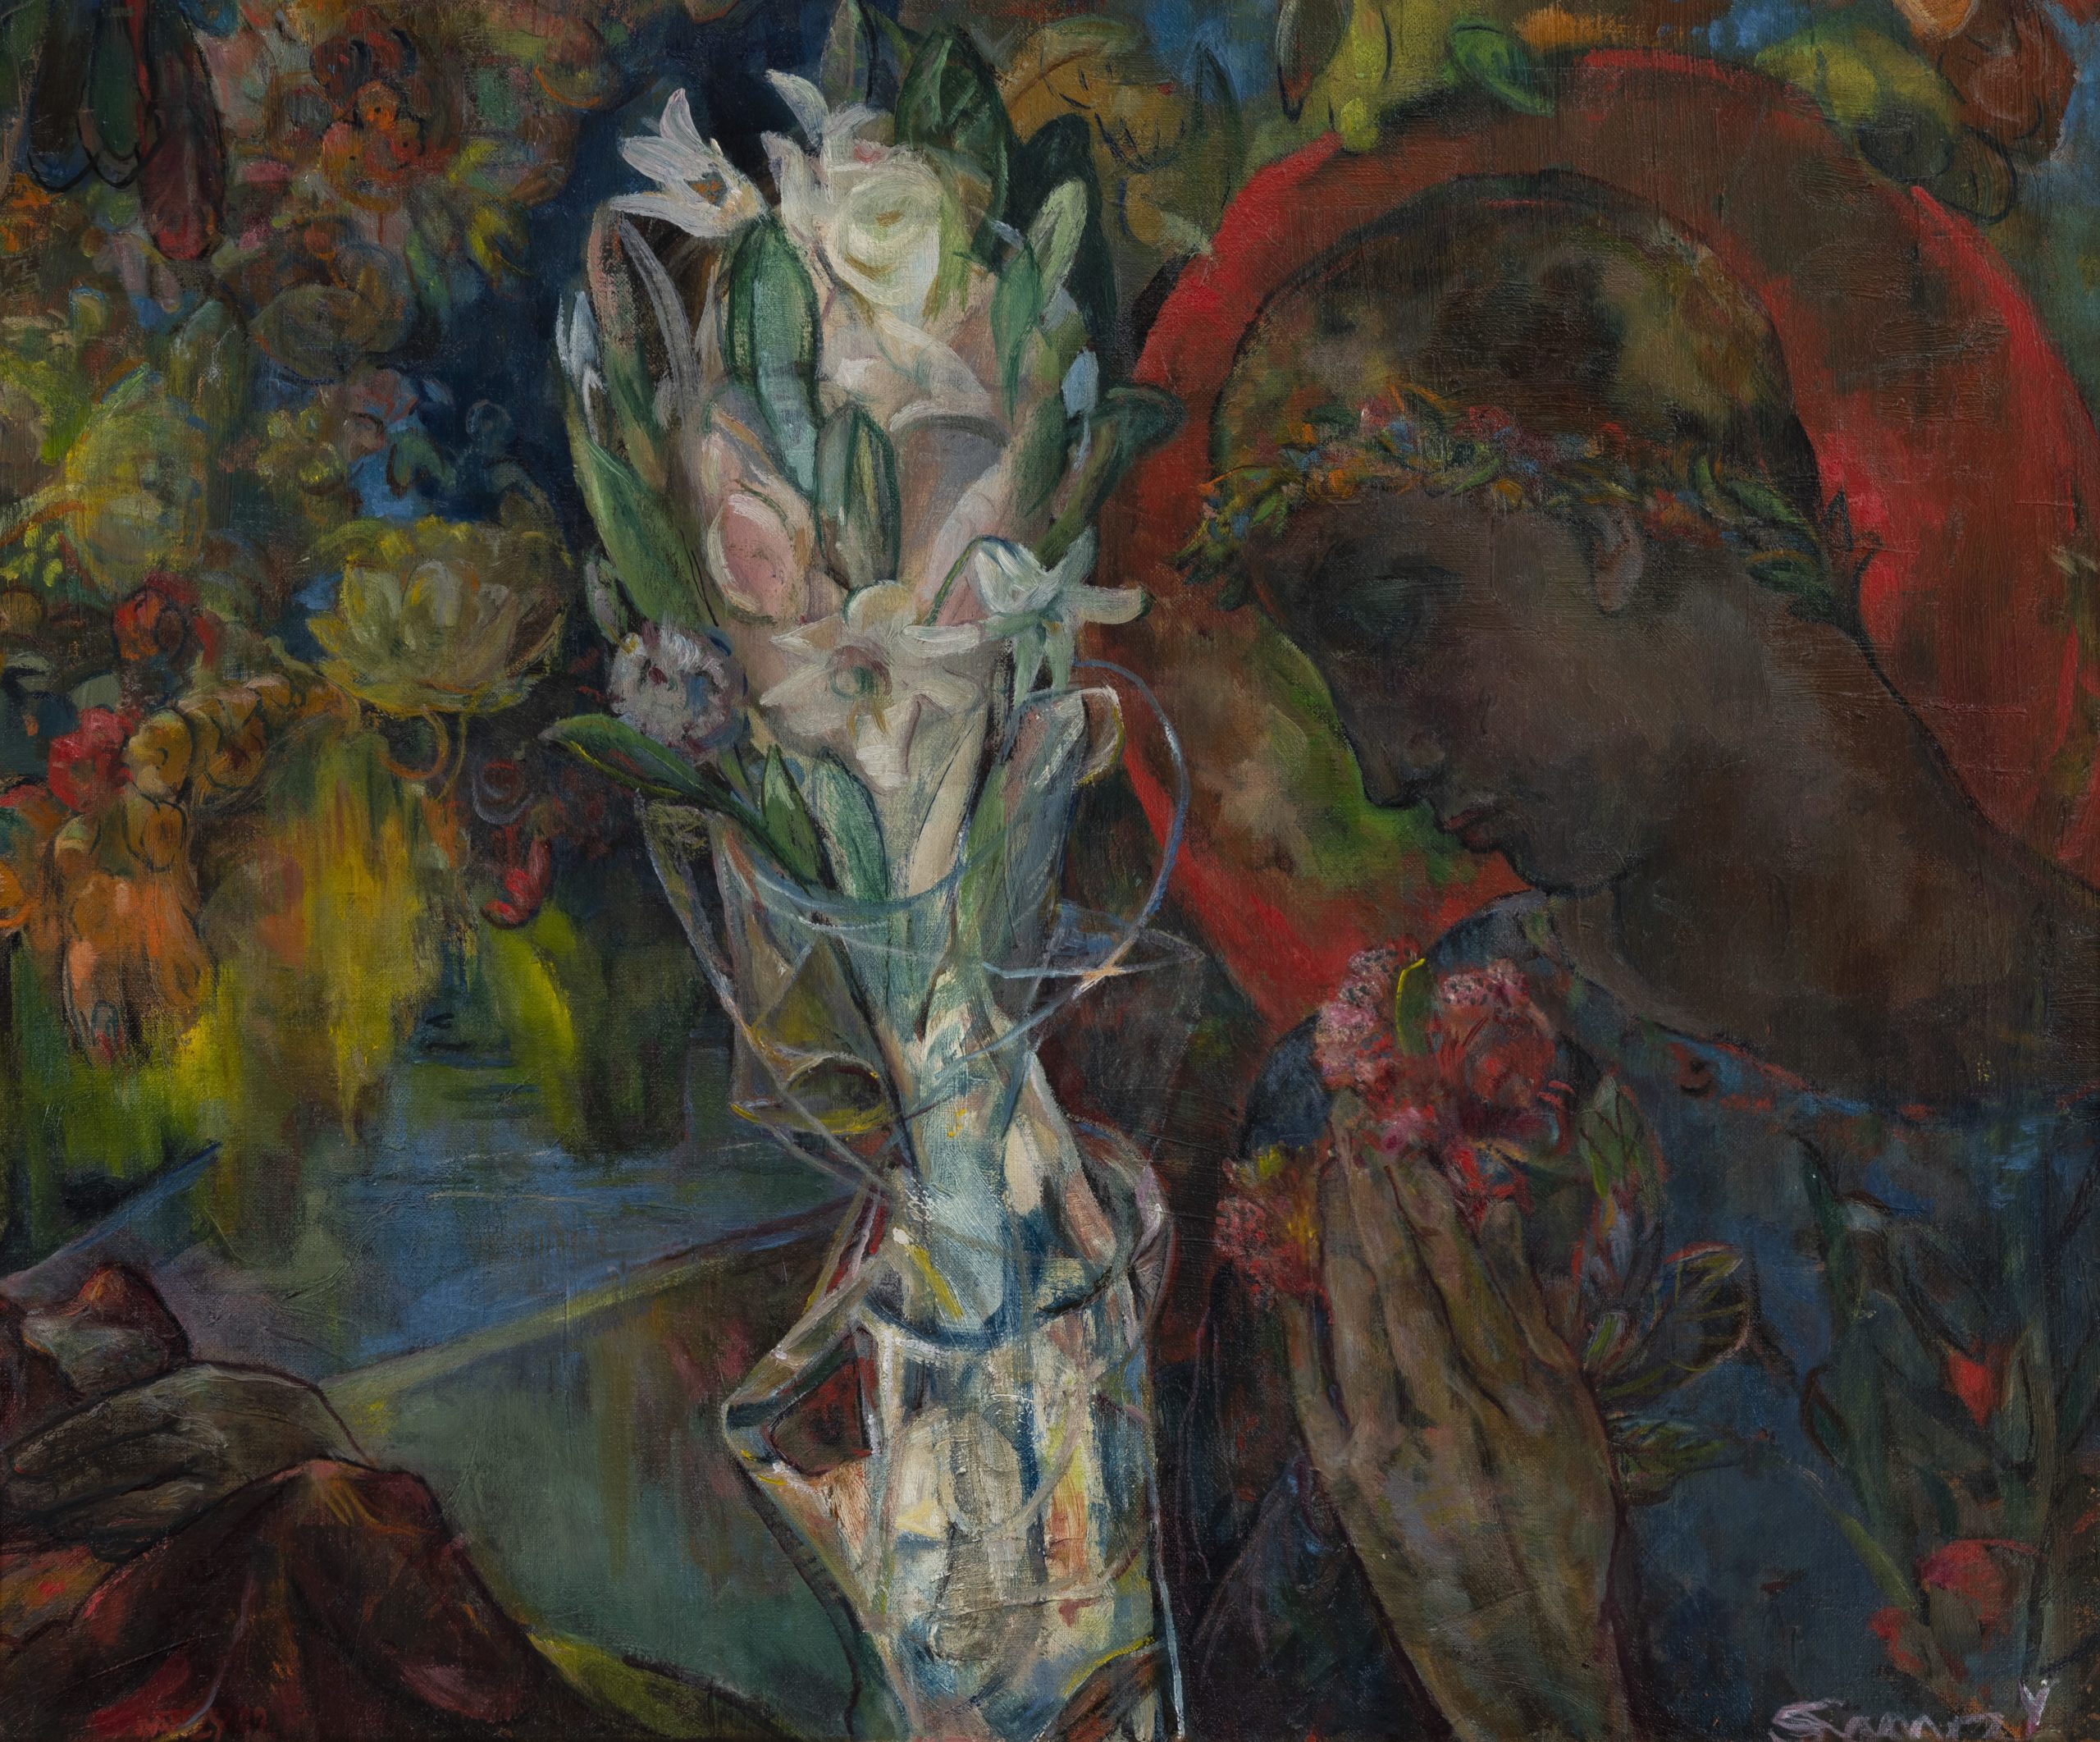 “Looking at the Stars”: Irish Art at the University of Notre Dame  through December 14, 2019 at the Snite Museum of Art